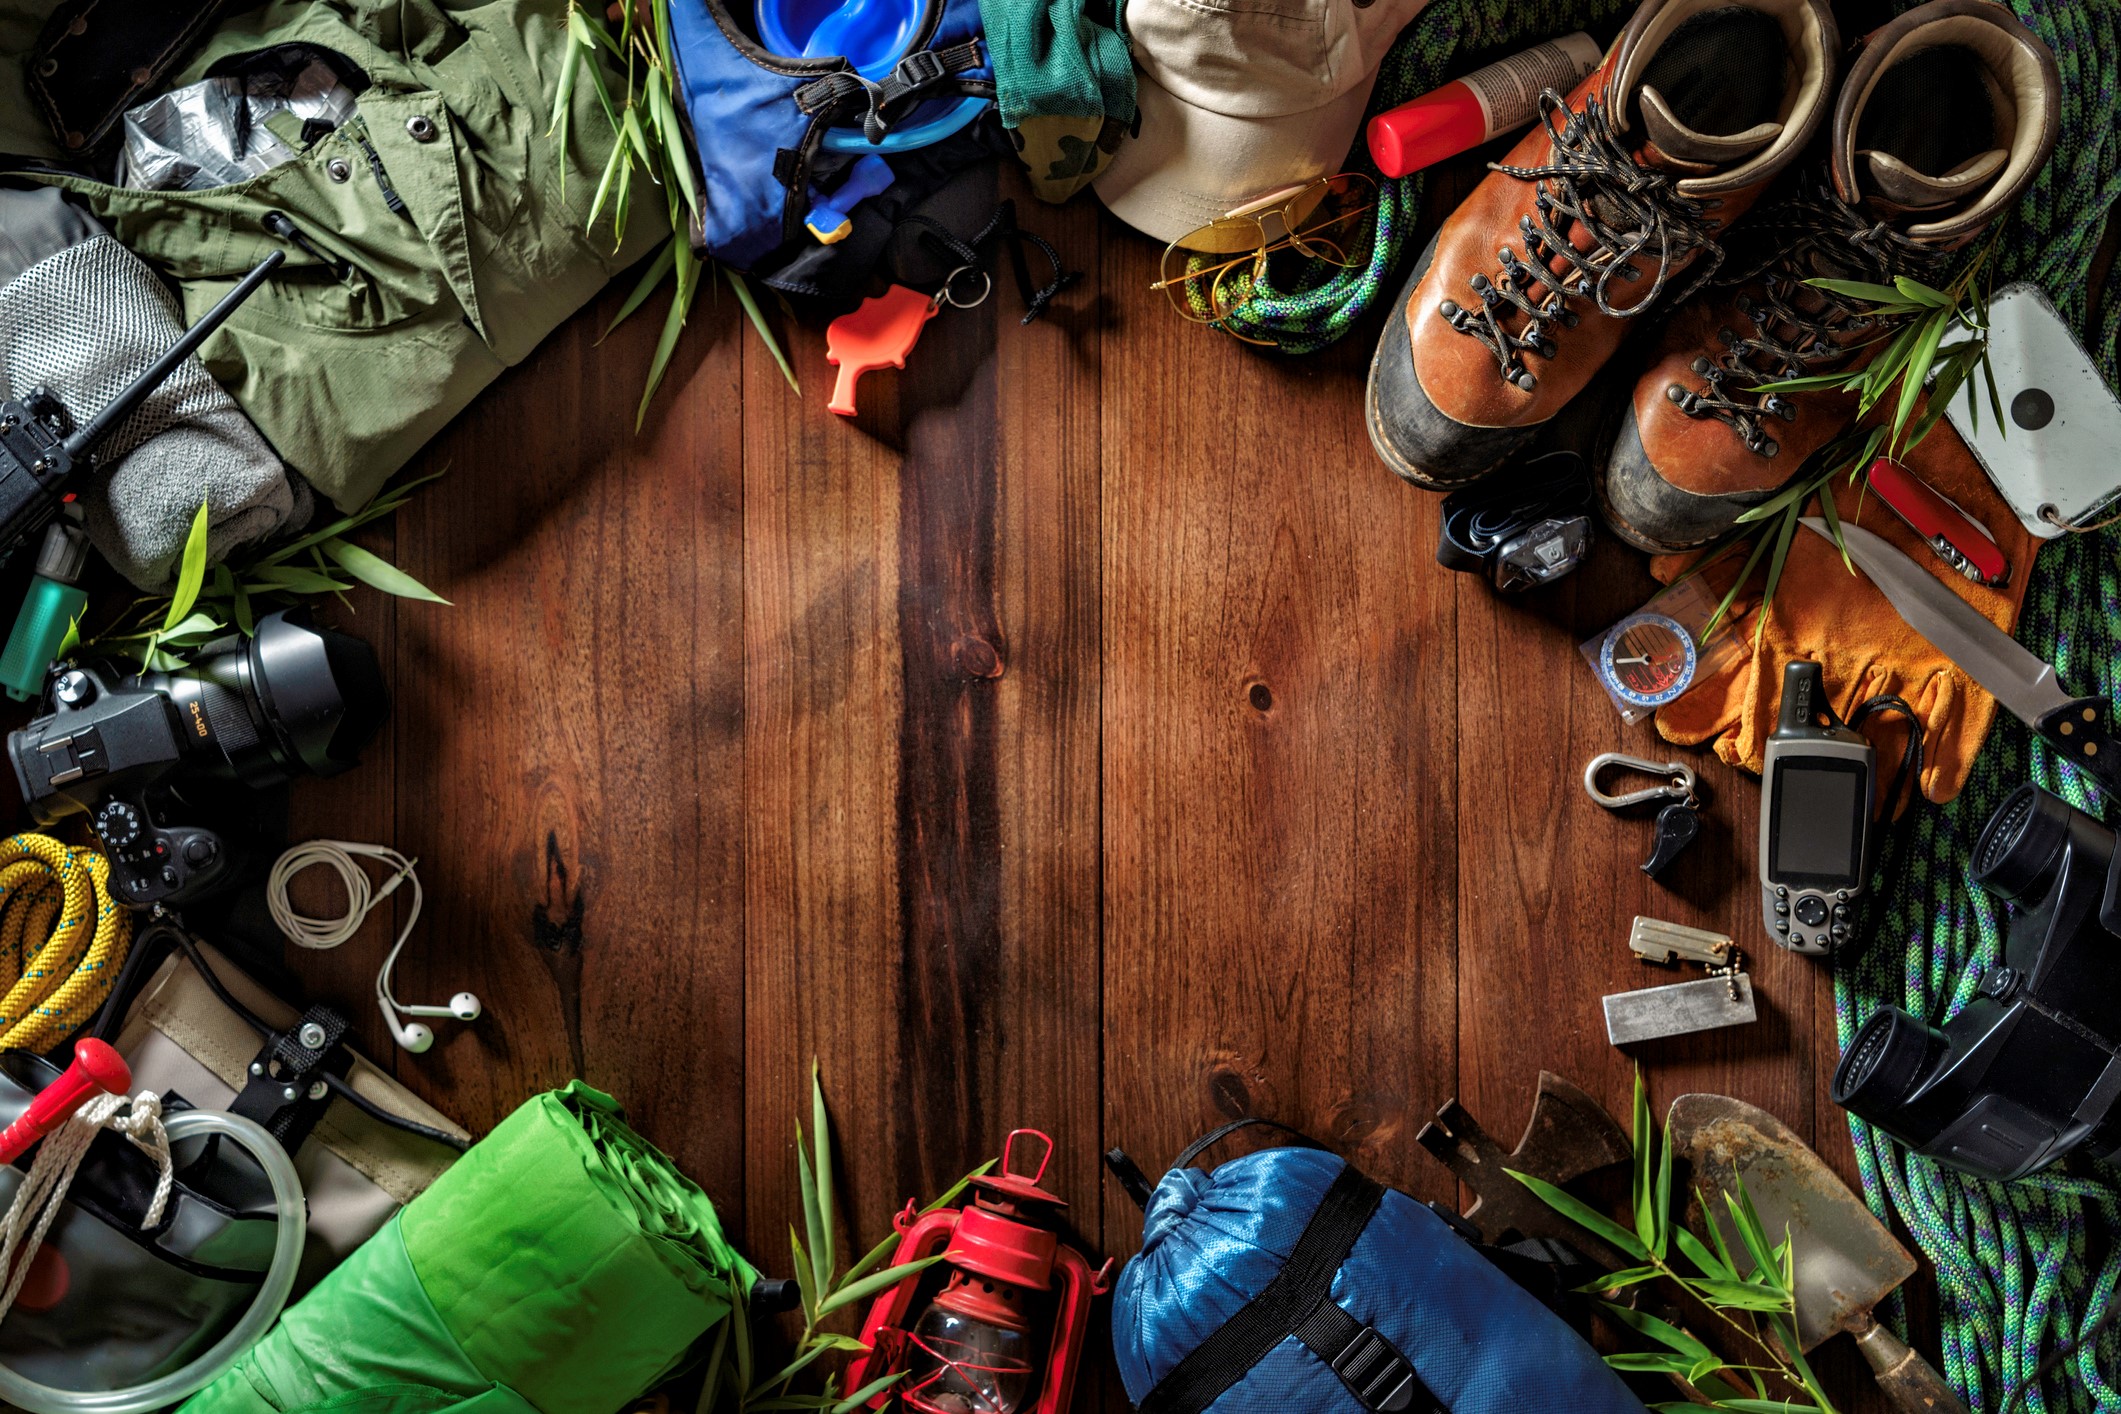 Stock up on hiking and camping gear at the best places to shop for